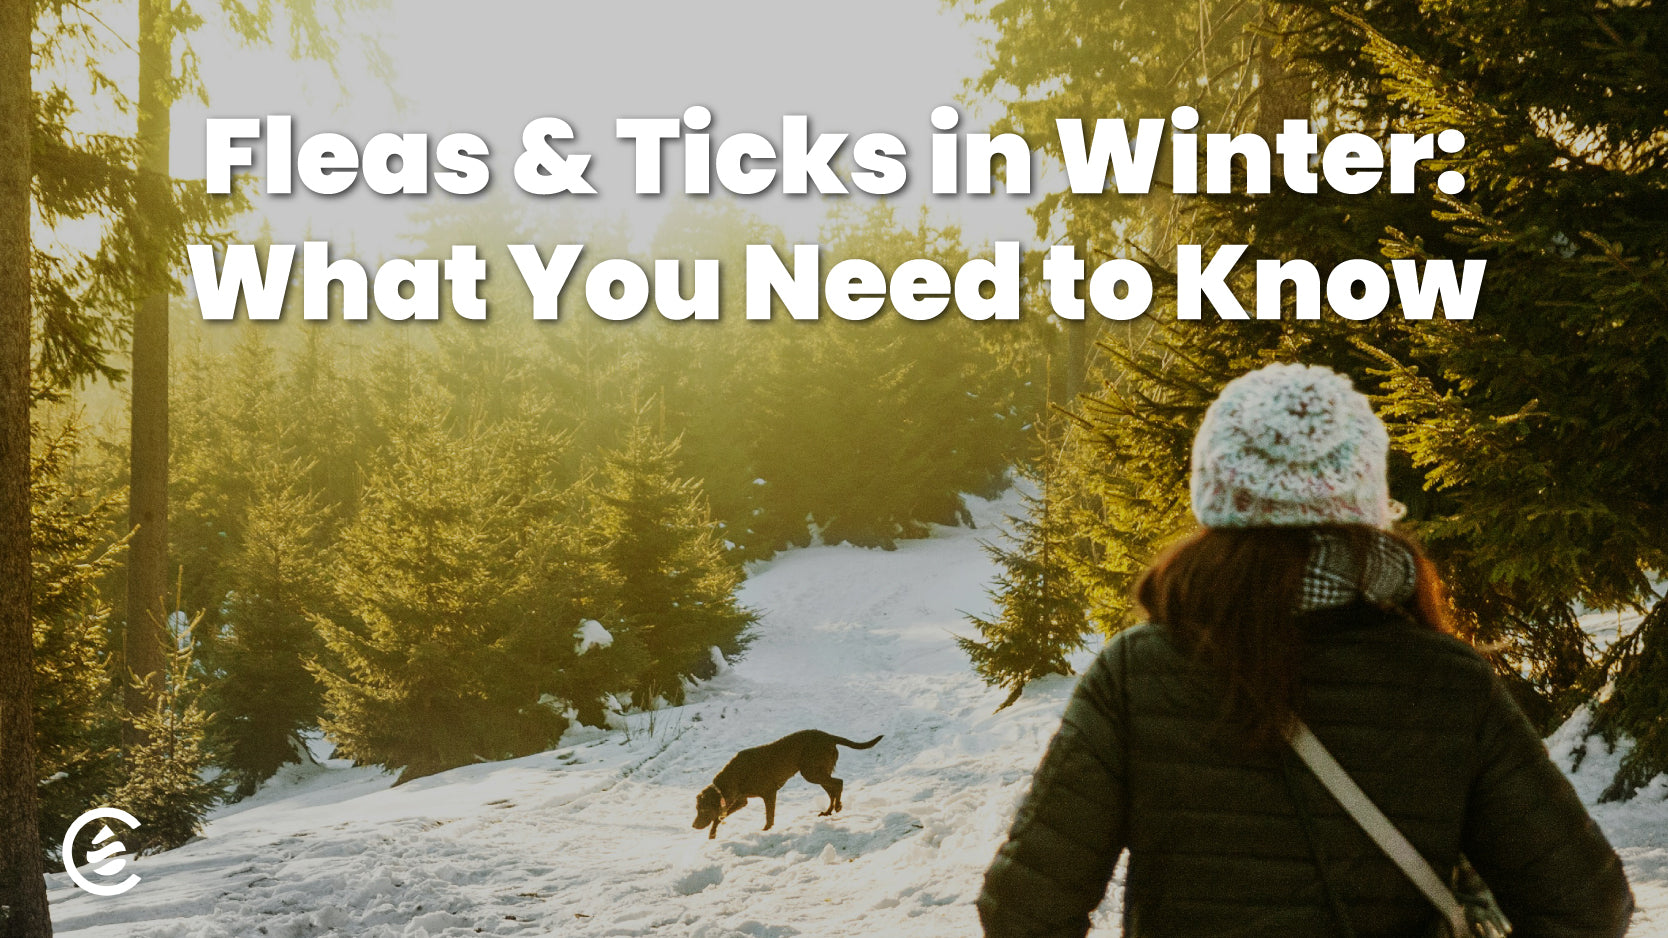 Fleas & Ticks in Winter: What You Need to Know